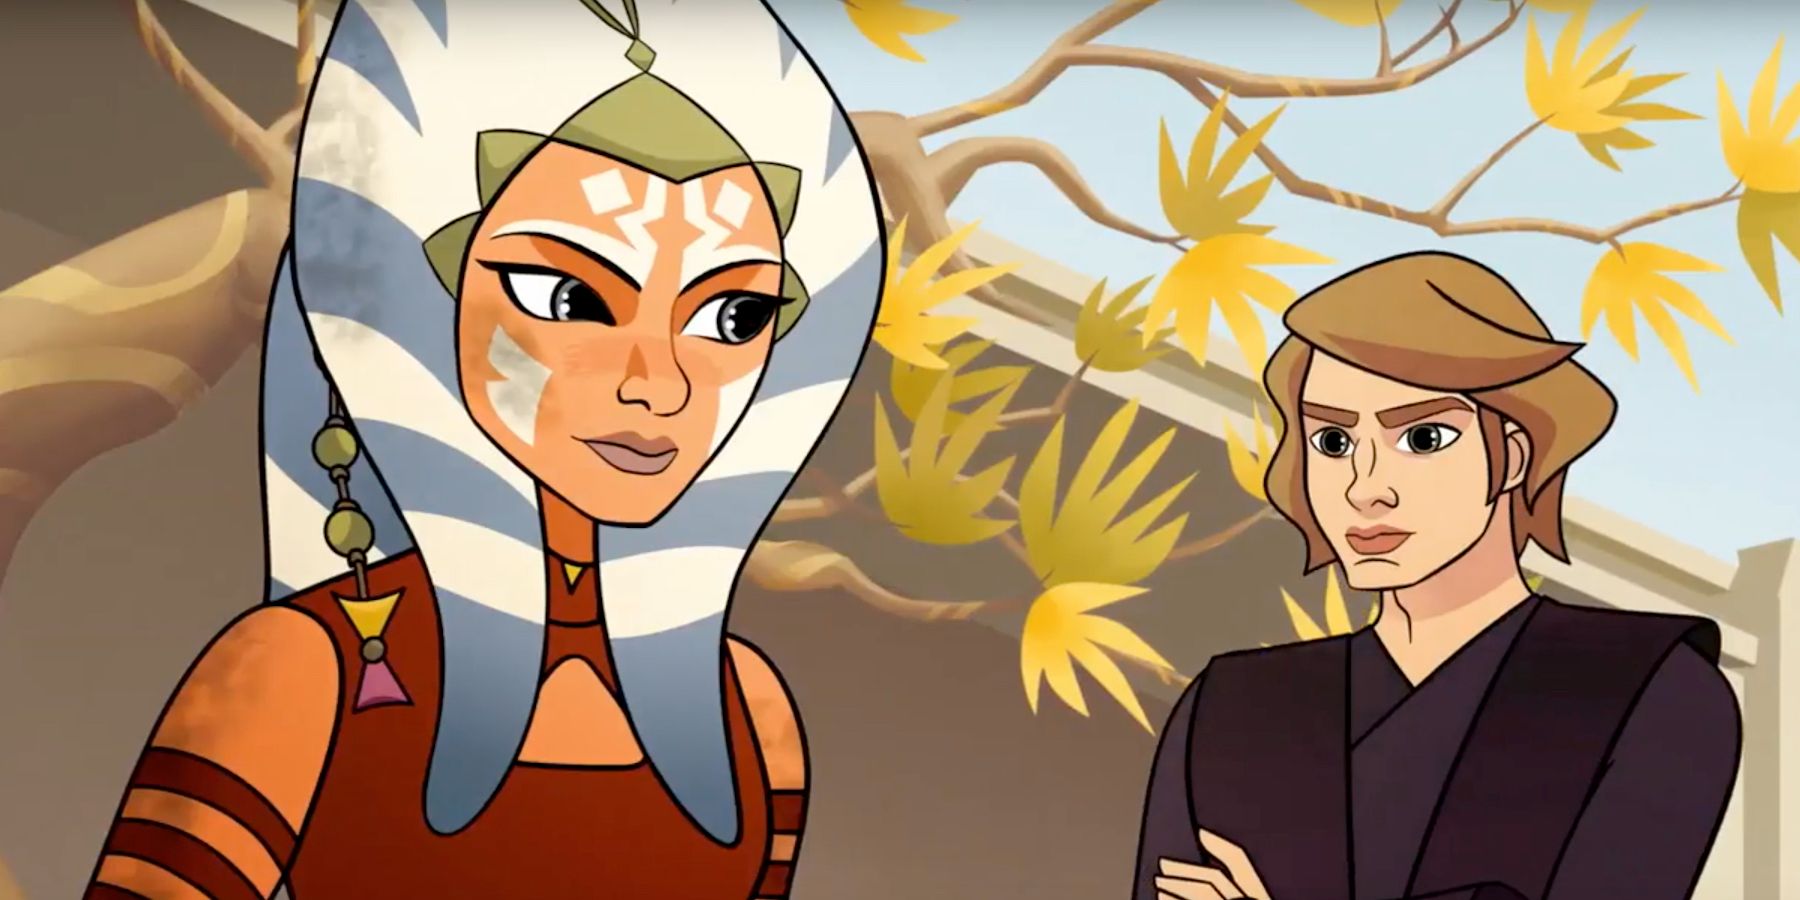 Anakin greets Ahsoka before her ceremony in Forces Of Destiny